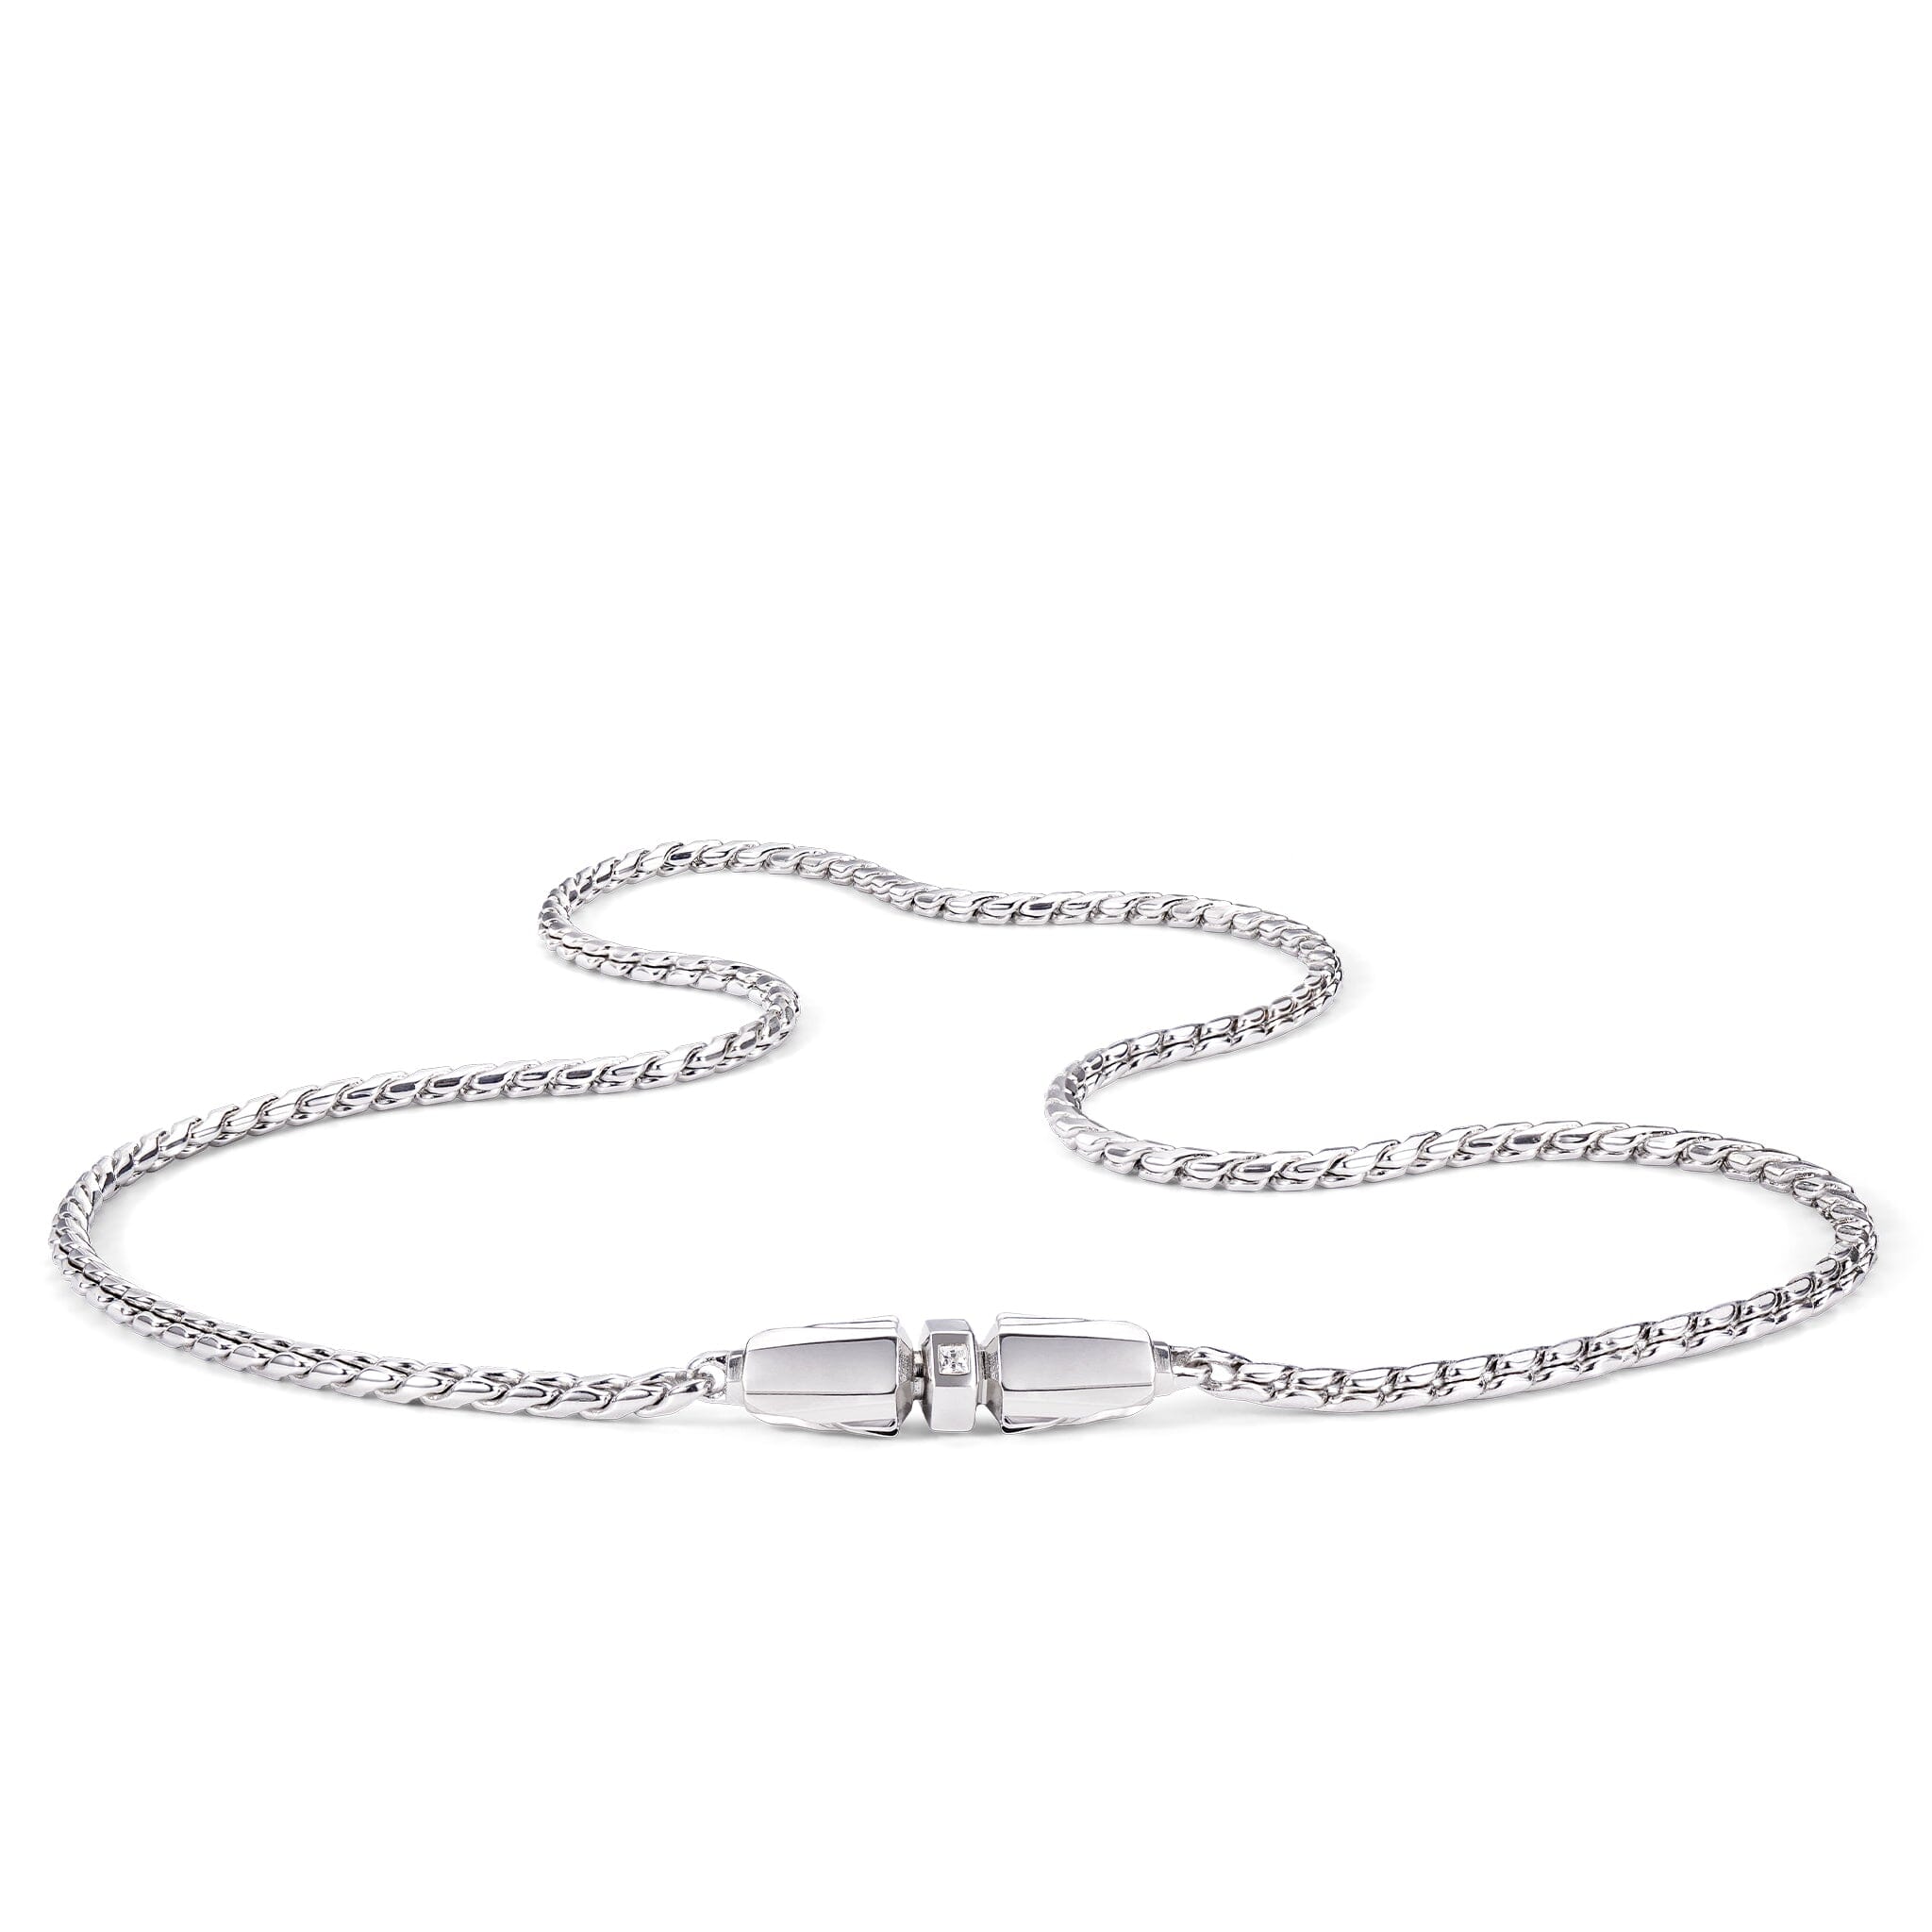 Men's Silver Chain with Feather Clasp Chains WAA FASHION GROUP Regular 